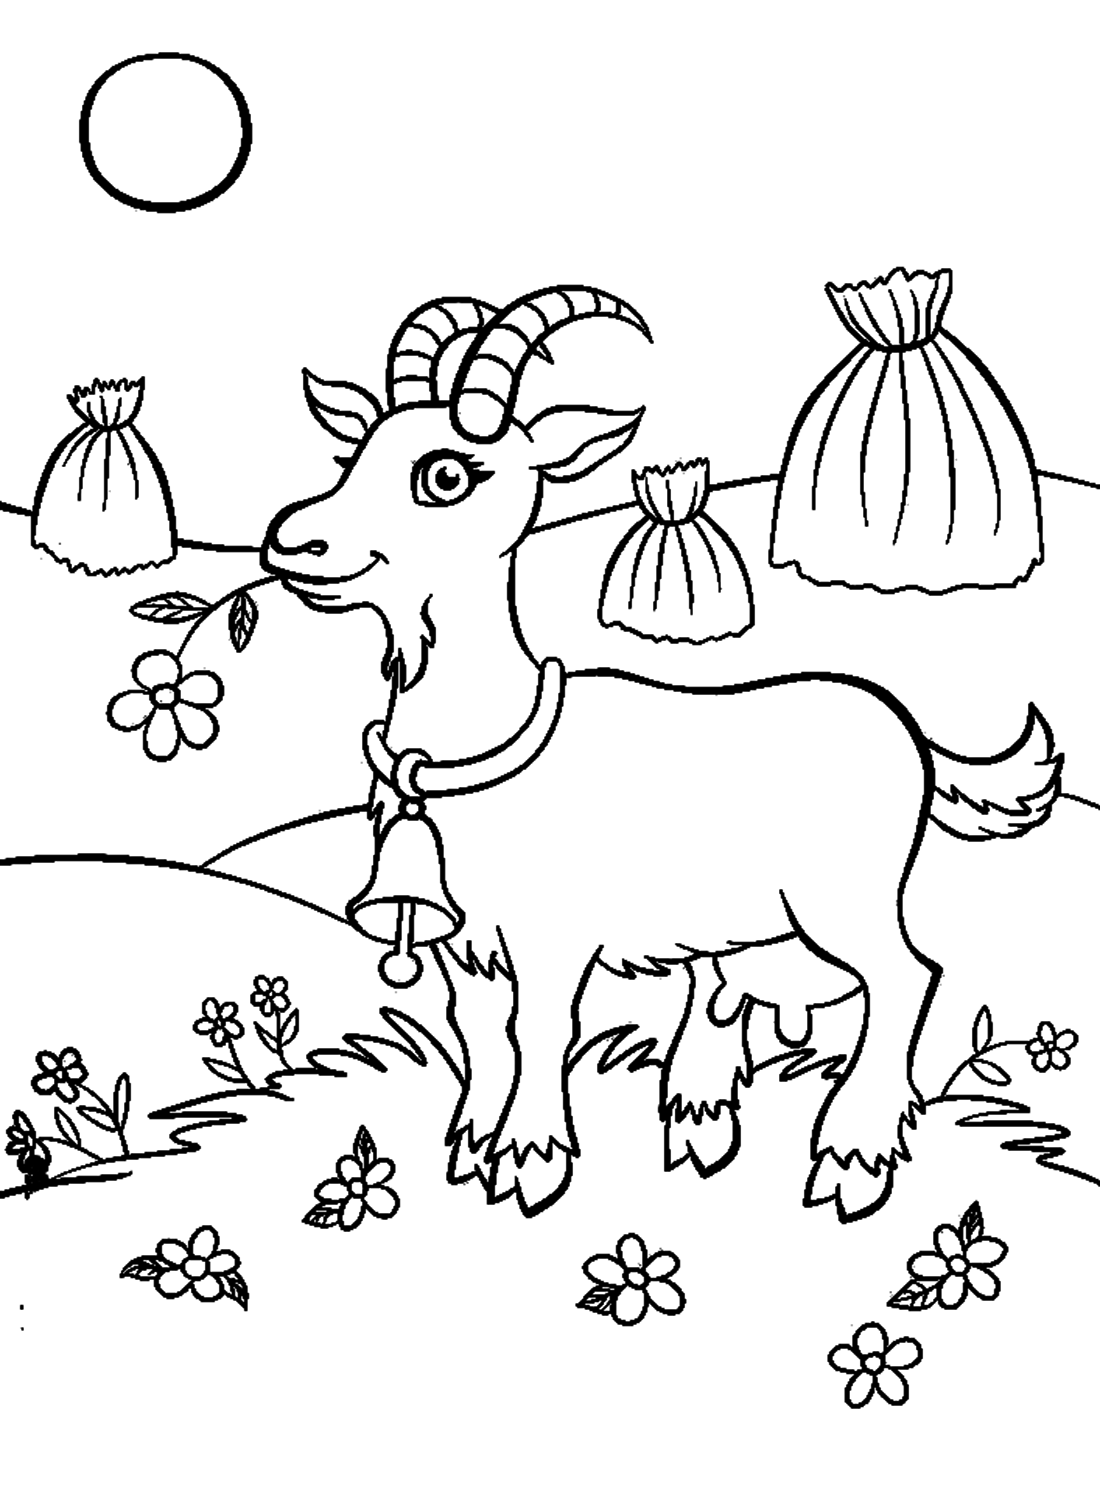 Adorabe Goat On Grass Field Coloring Pages